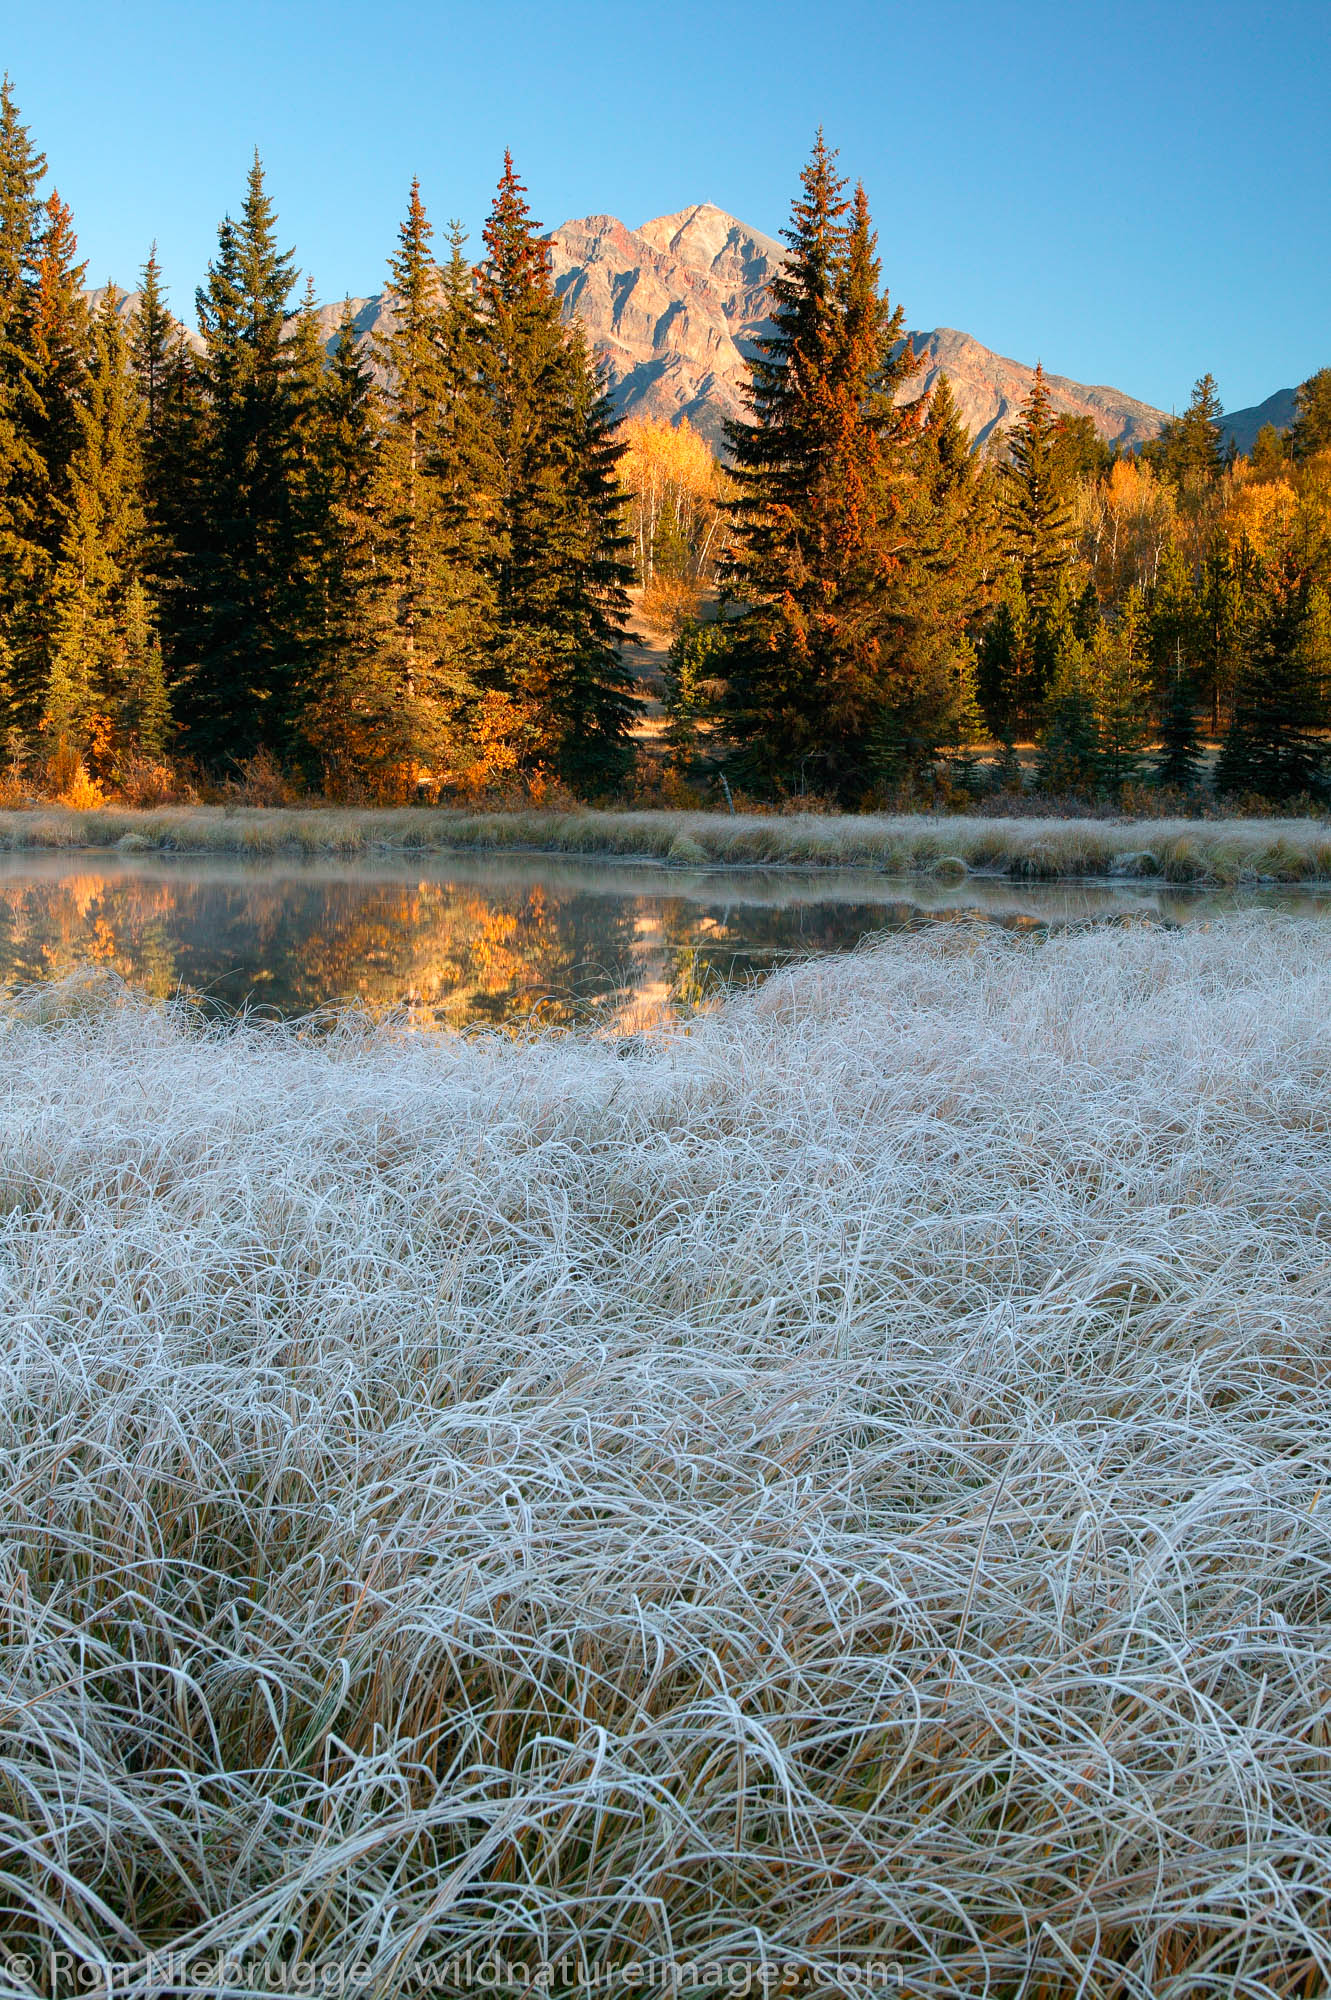 Frost on the ground at Cottonwood Slough with Pyramid Mountain in the background, Jasper National Park, Alberta, Canada.